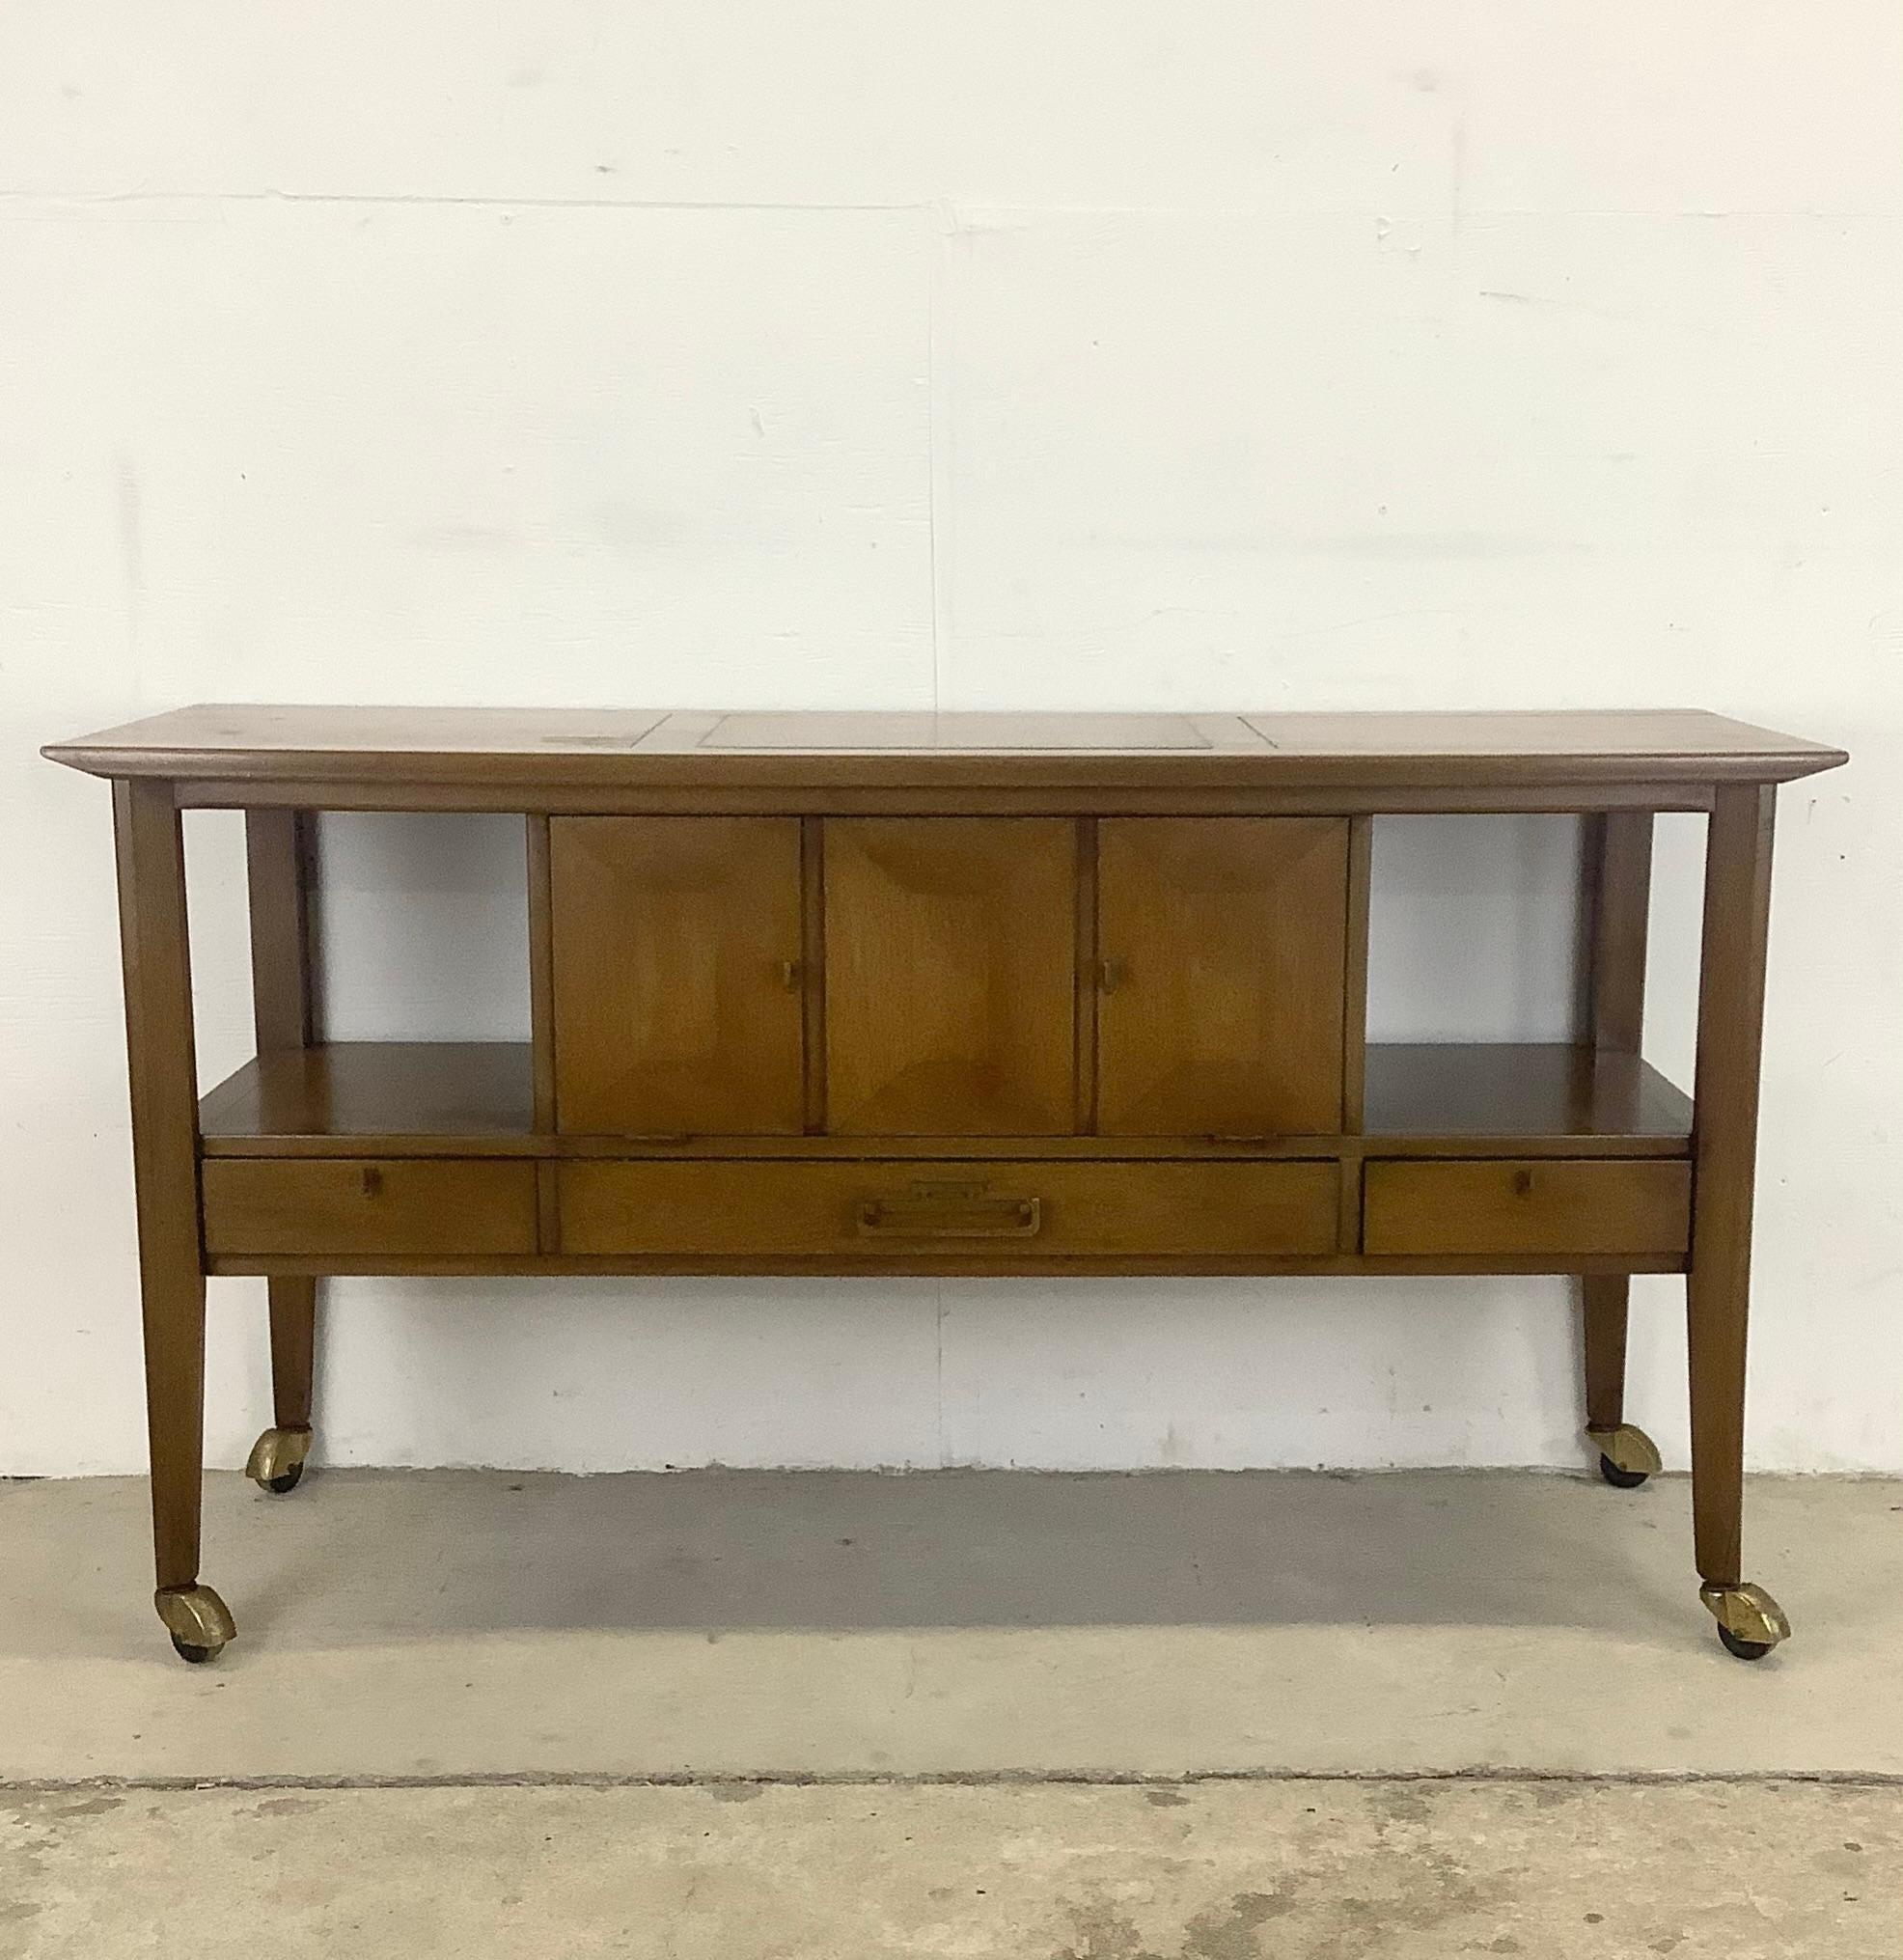 This unique mid-century service cart from White Furniture features beautiful vintage walnut finish combined with brass trim pulls and spacious storage options. The drop front cabinet storage pairs perfectly with additional drawers and shelf space